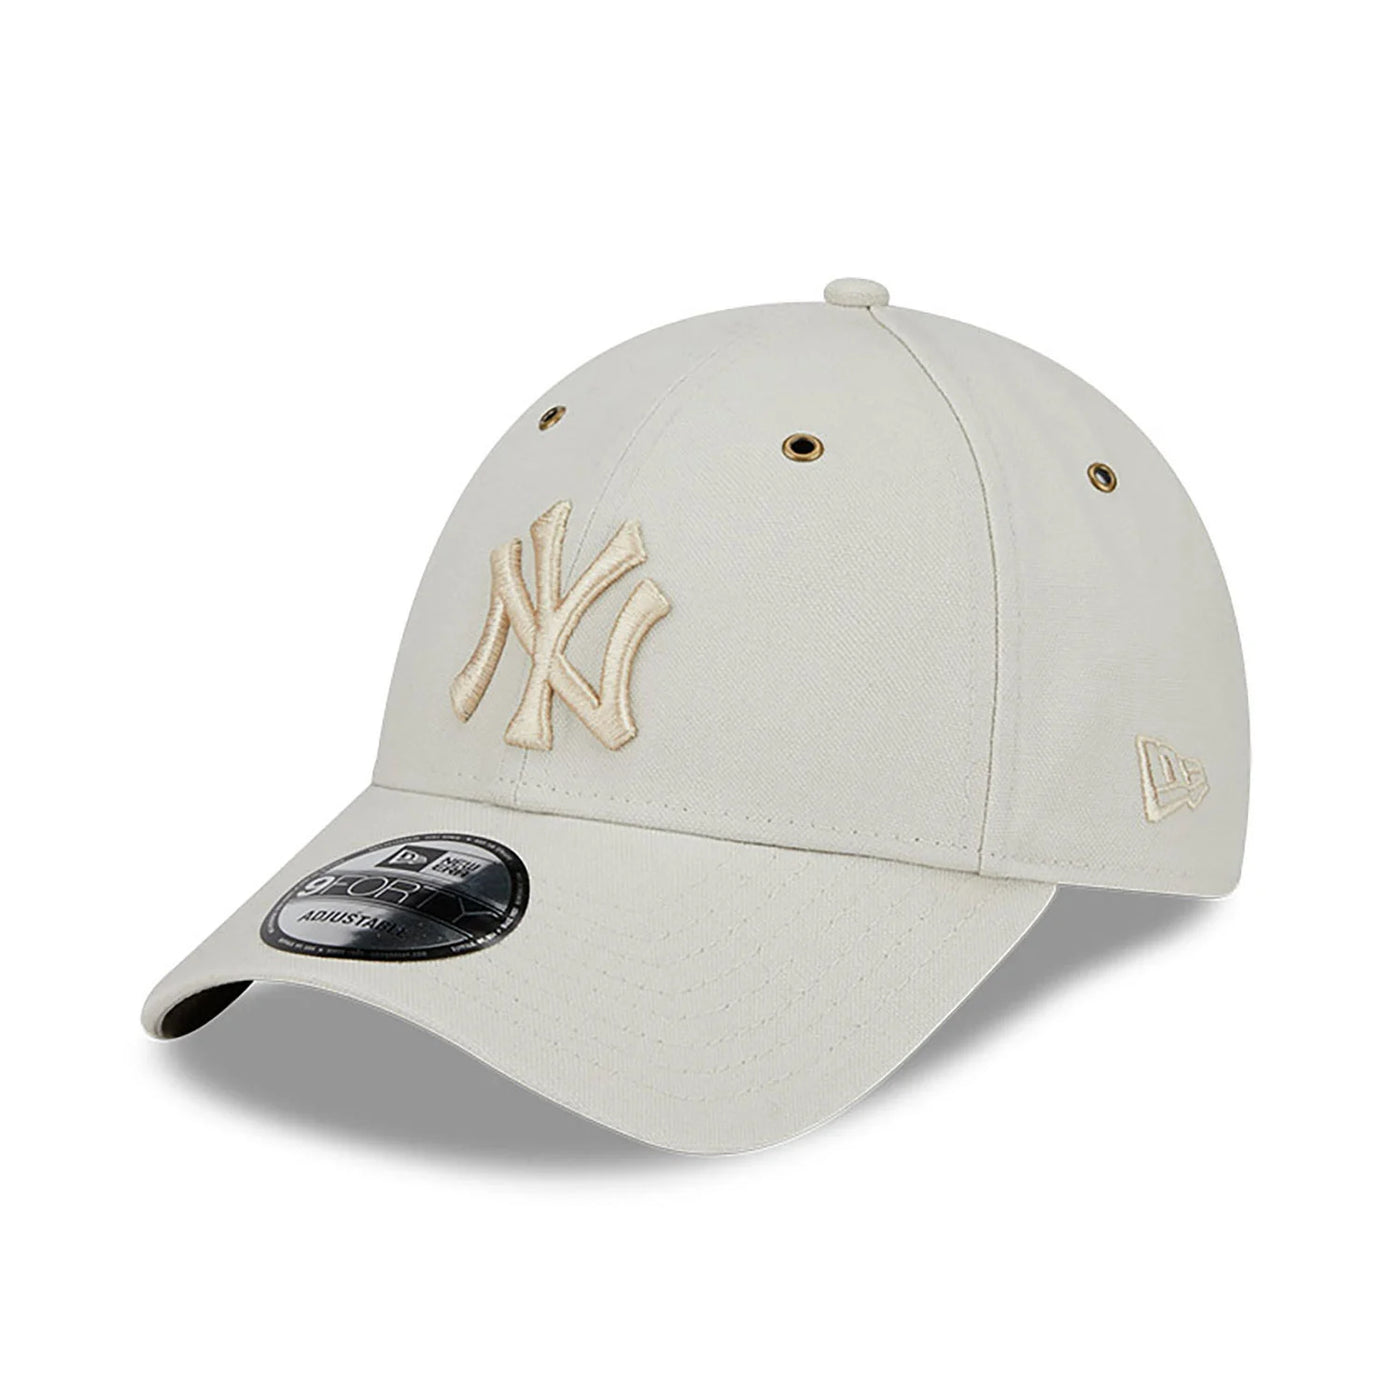 CAPPELLO 9FORTY NEW YORK YANKEES WASHED CANVAS PANNA NEW ERA UOMO